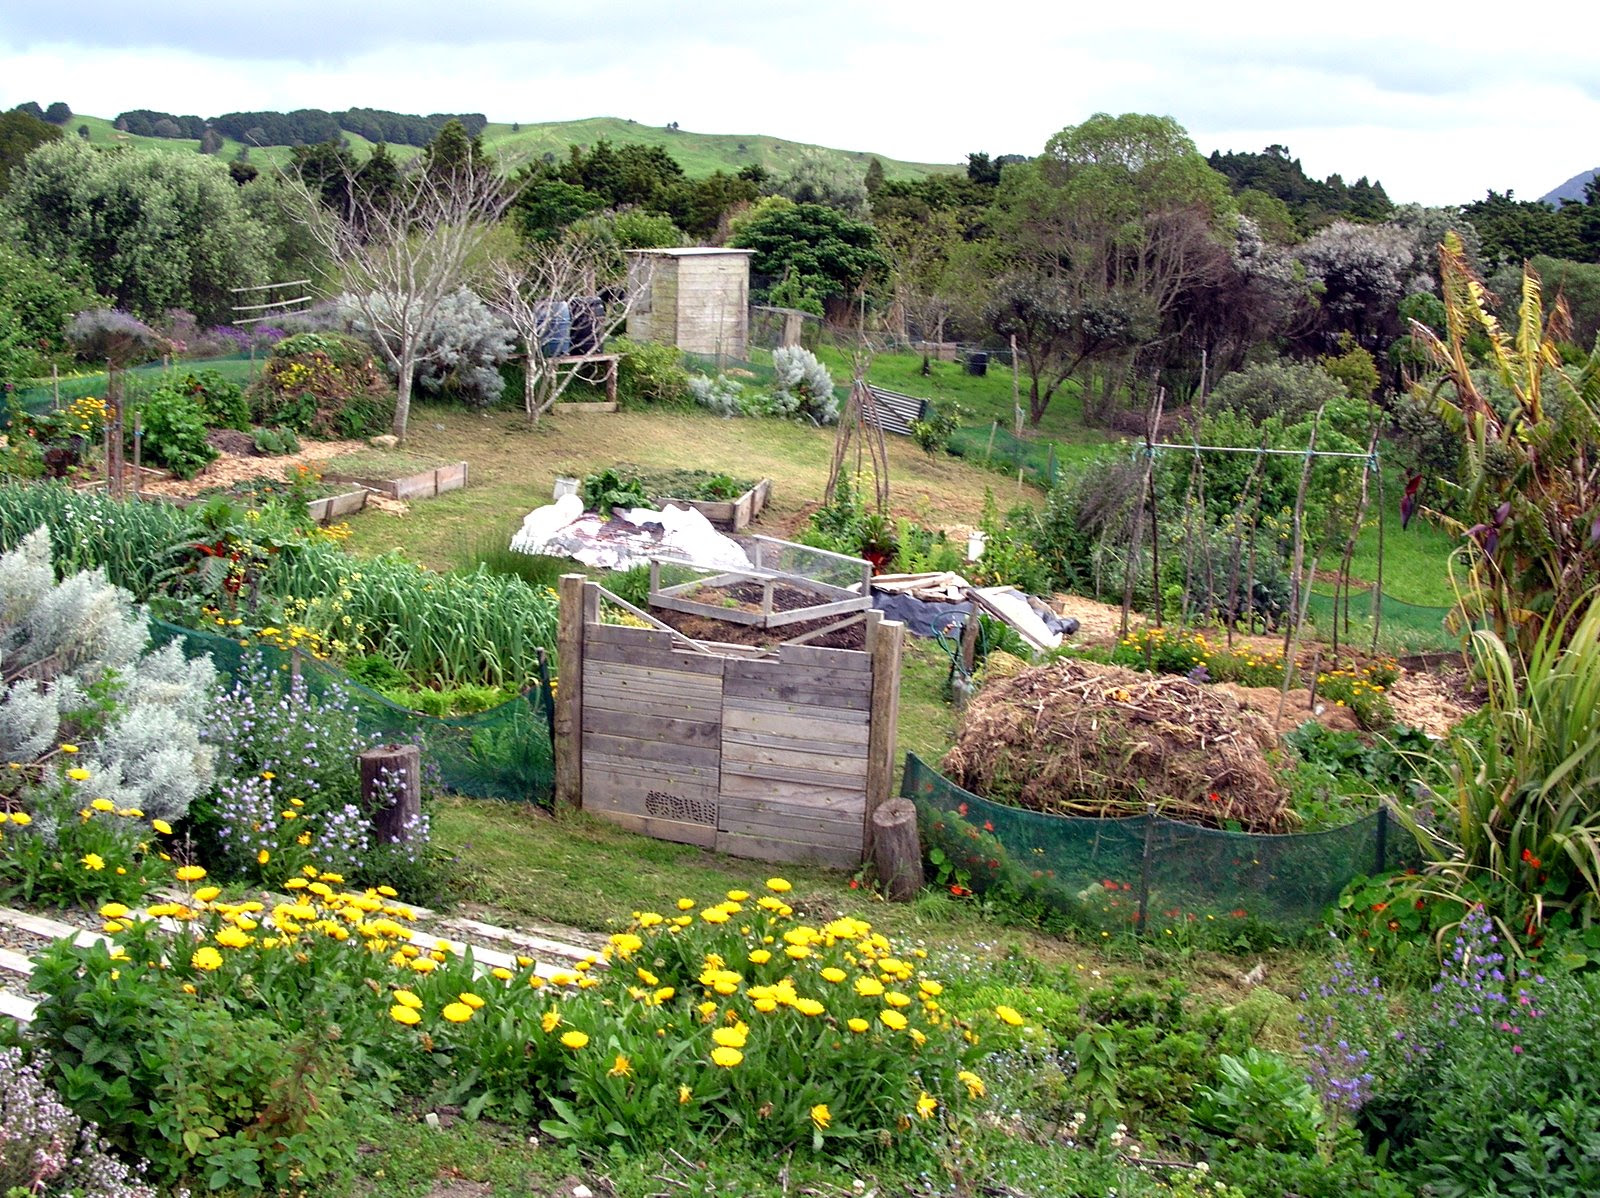 The Austin Public Library is hosting a talk on permaculture design this Saturday.